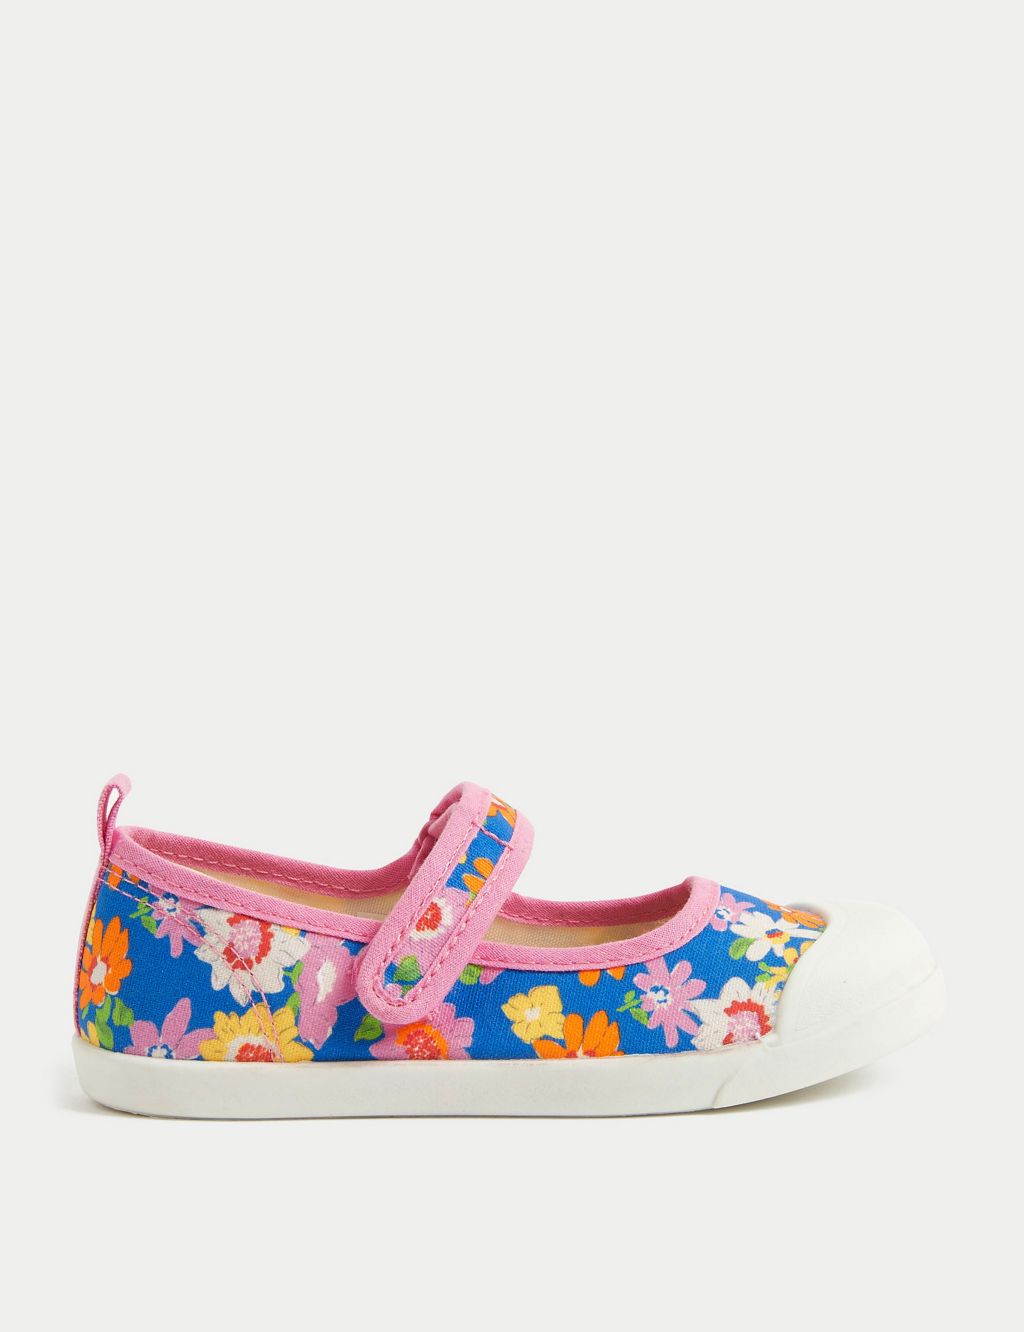 Kids’ Riptape Floral Mary Jane Shoes (4 Small - 13 Small) image 1